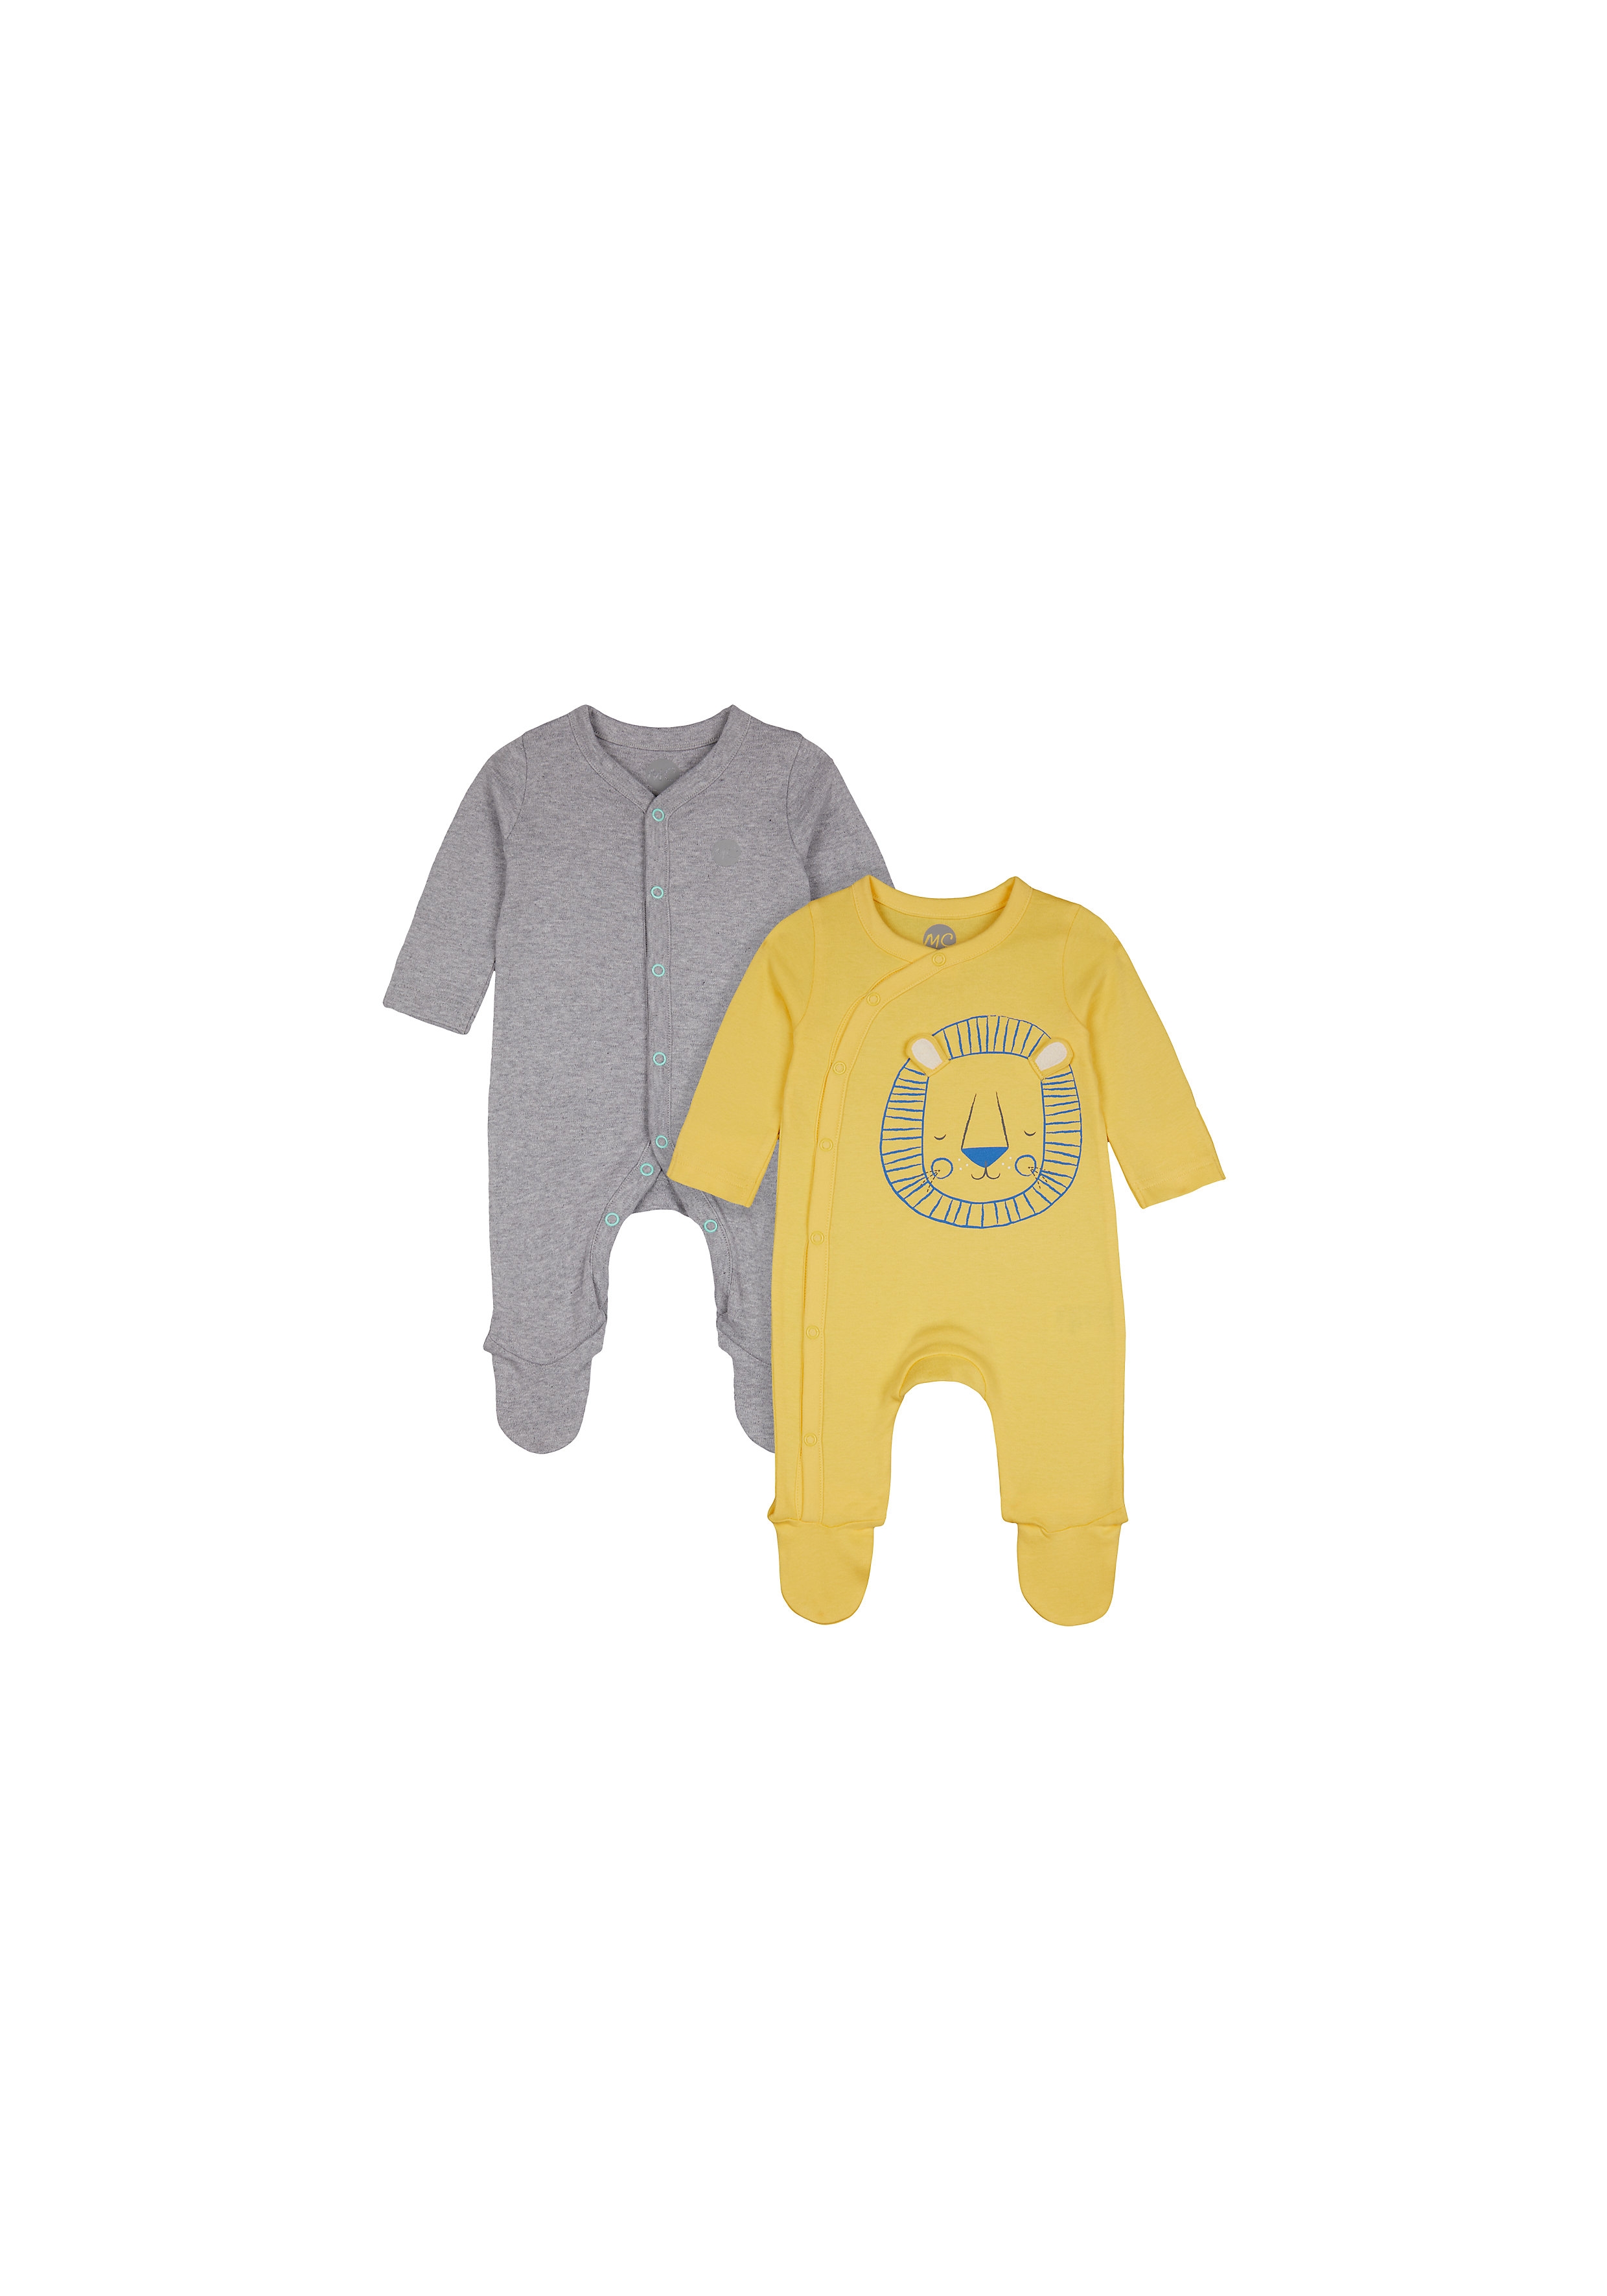 Boys Full Sleeves Romper Lion Print With 3D Ears - Pack Of 2 - Grey Yellow